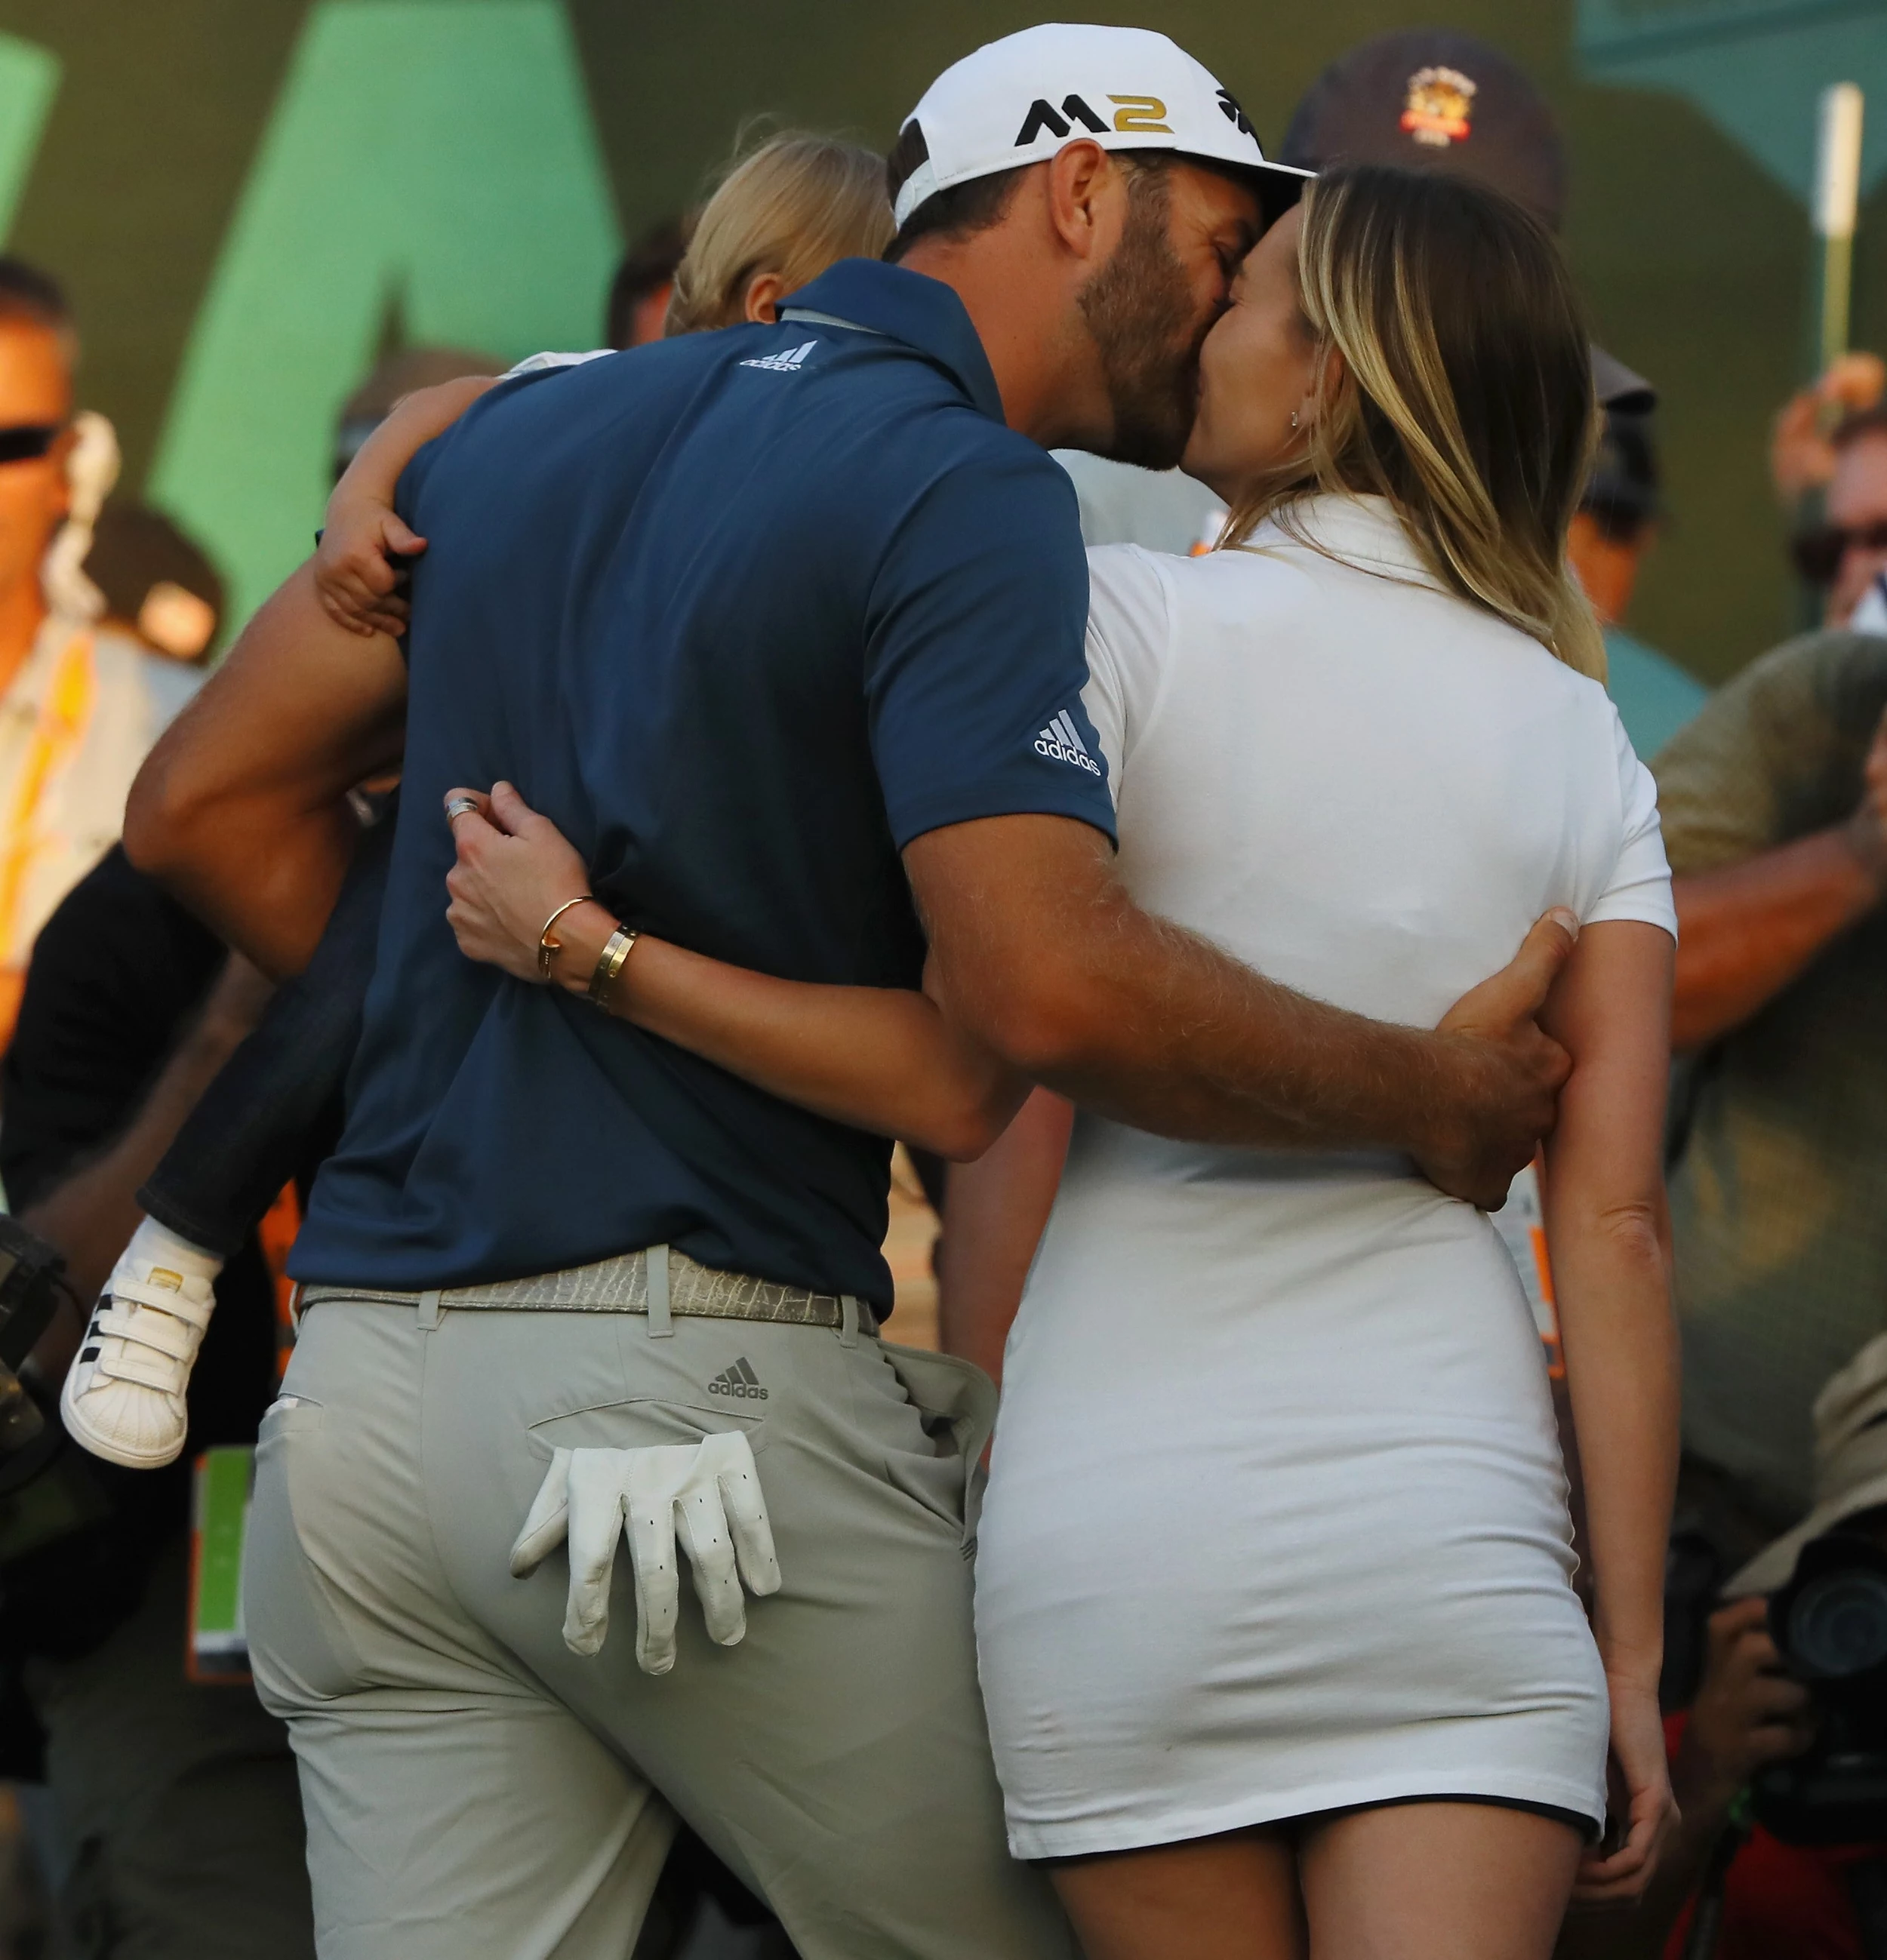 Paulina Gretzky Models Gear On Tennis Court, While Husband Dustin